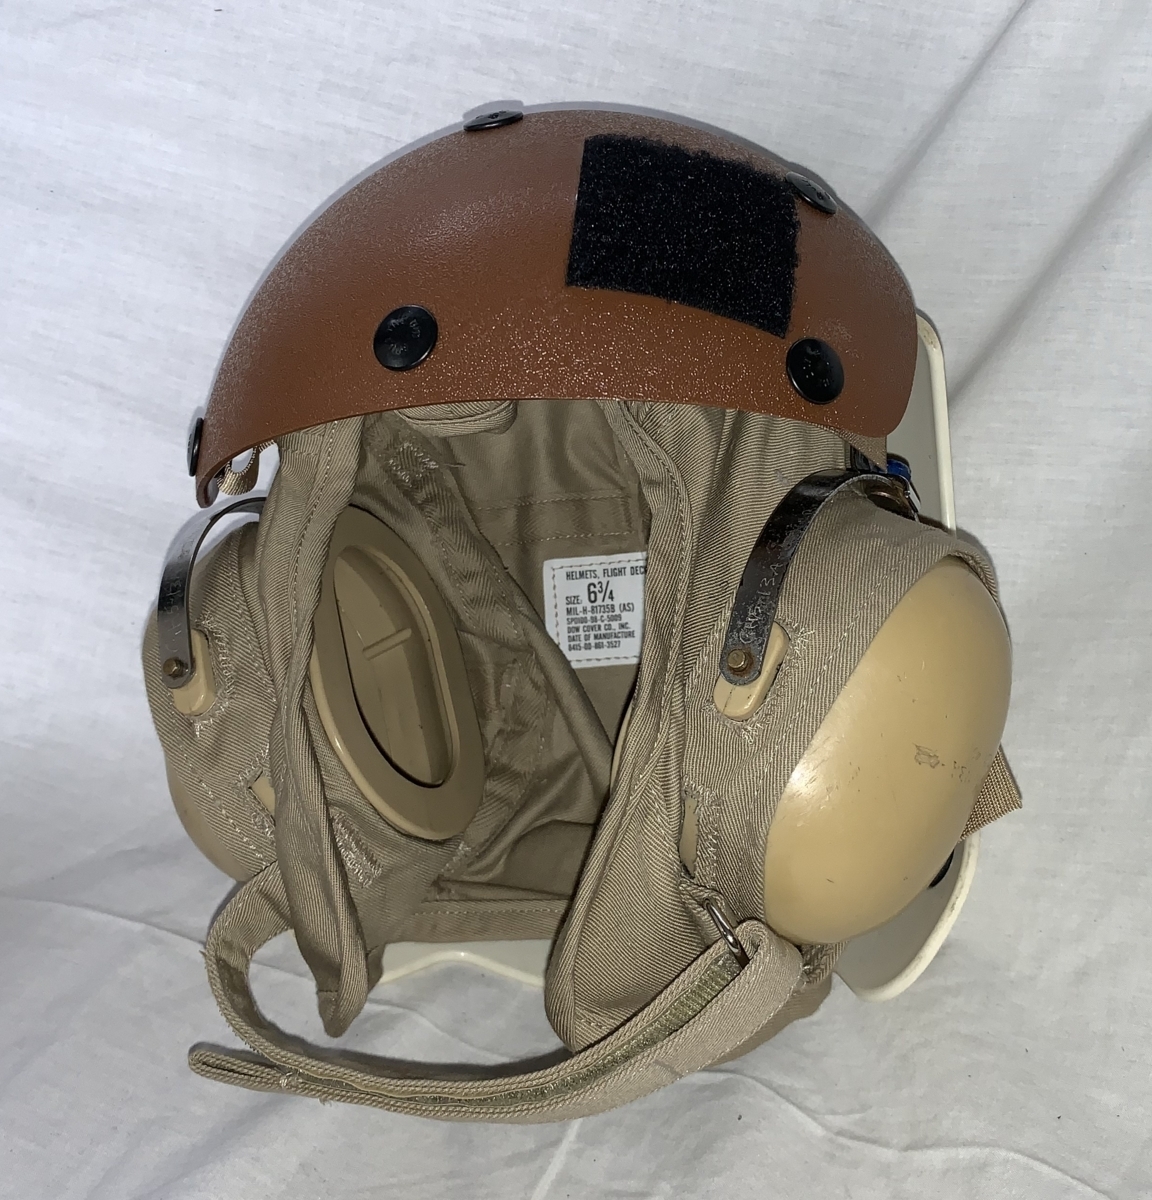  the US armed forces navy flight deck Crew helmet NAVY navy 98 year size 6-3/4 Brown & white US.AIR FORCE USAF Air Force 6106A